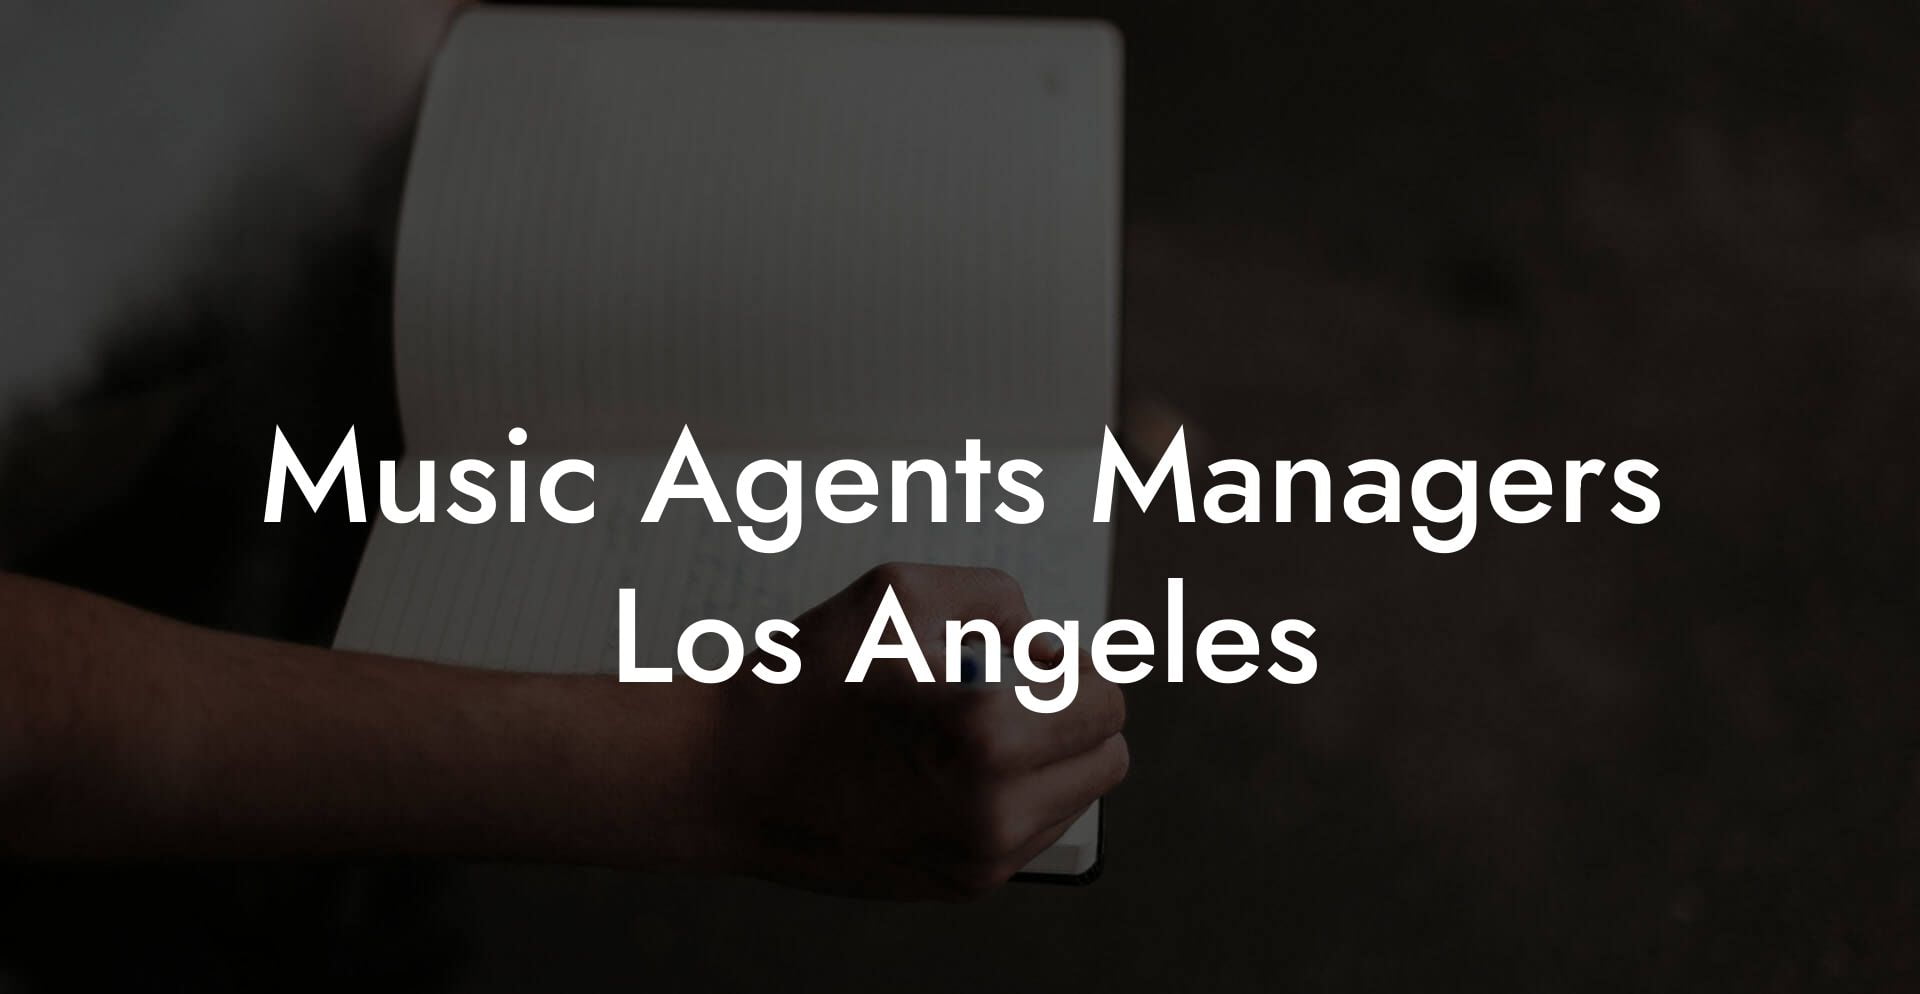 Music Agents Managers Los Angeles